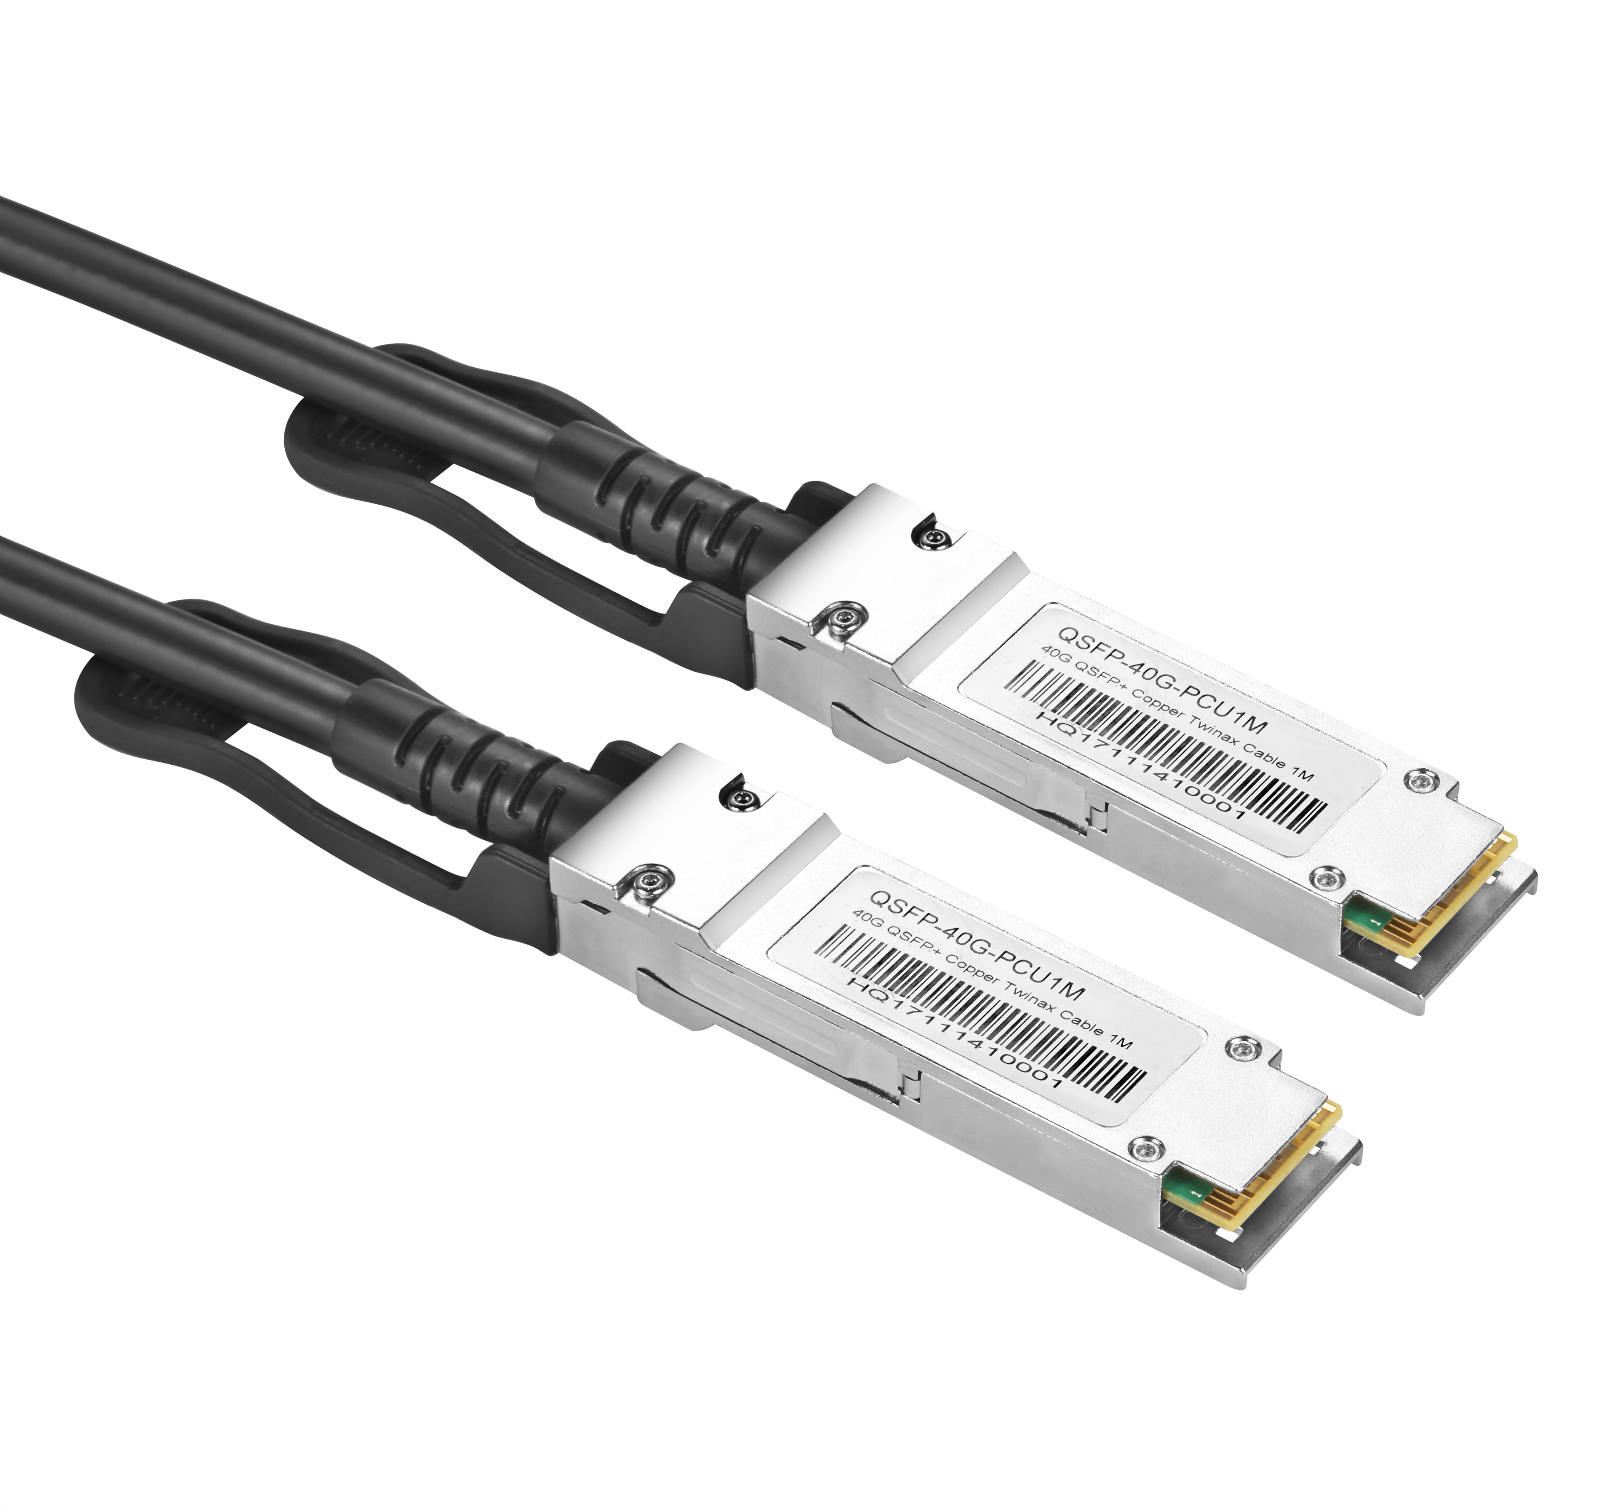 DAC Cable, we have always specialised in SFP DAC Cable and 